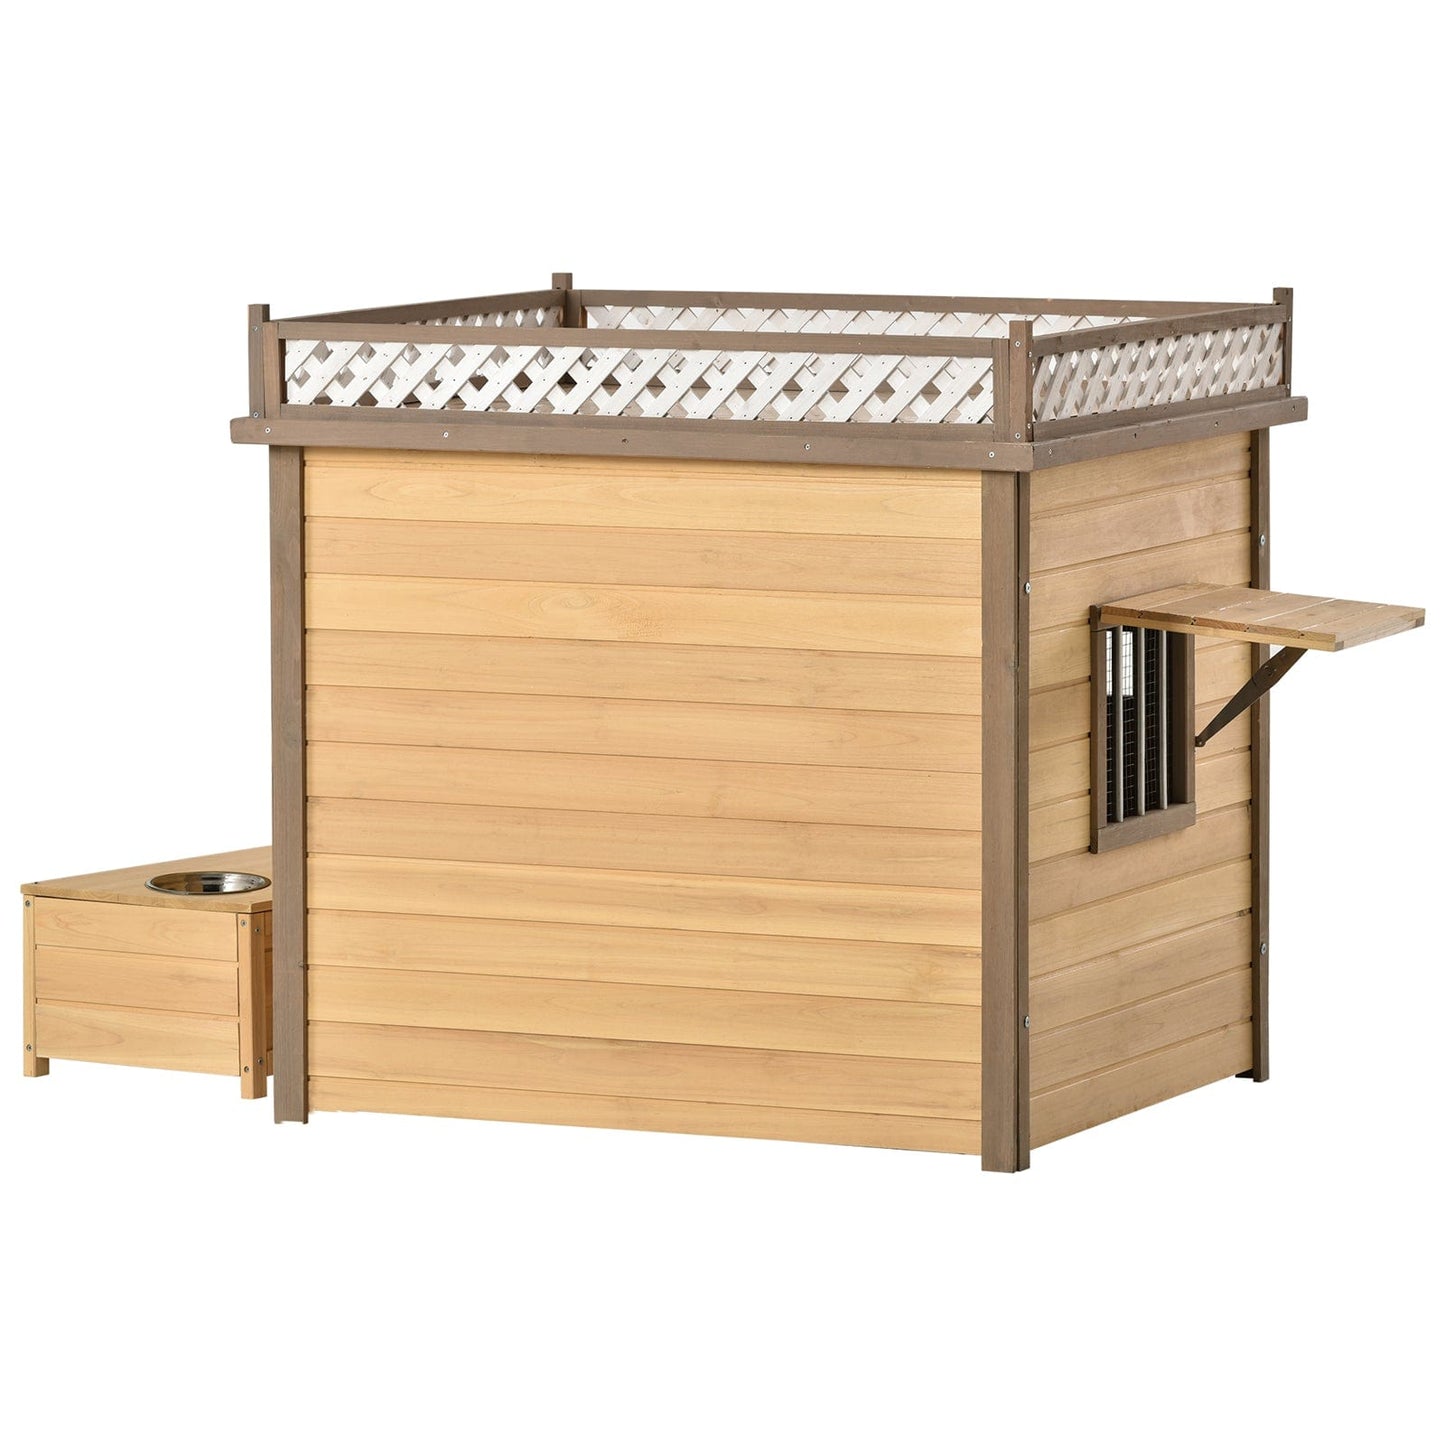 Wooden Dog Houses Weatherproof, 39.4” Puppy Shelter Kennel with Flower Stand, Plant Stand, Wood Feeder